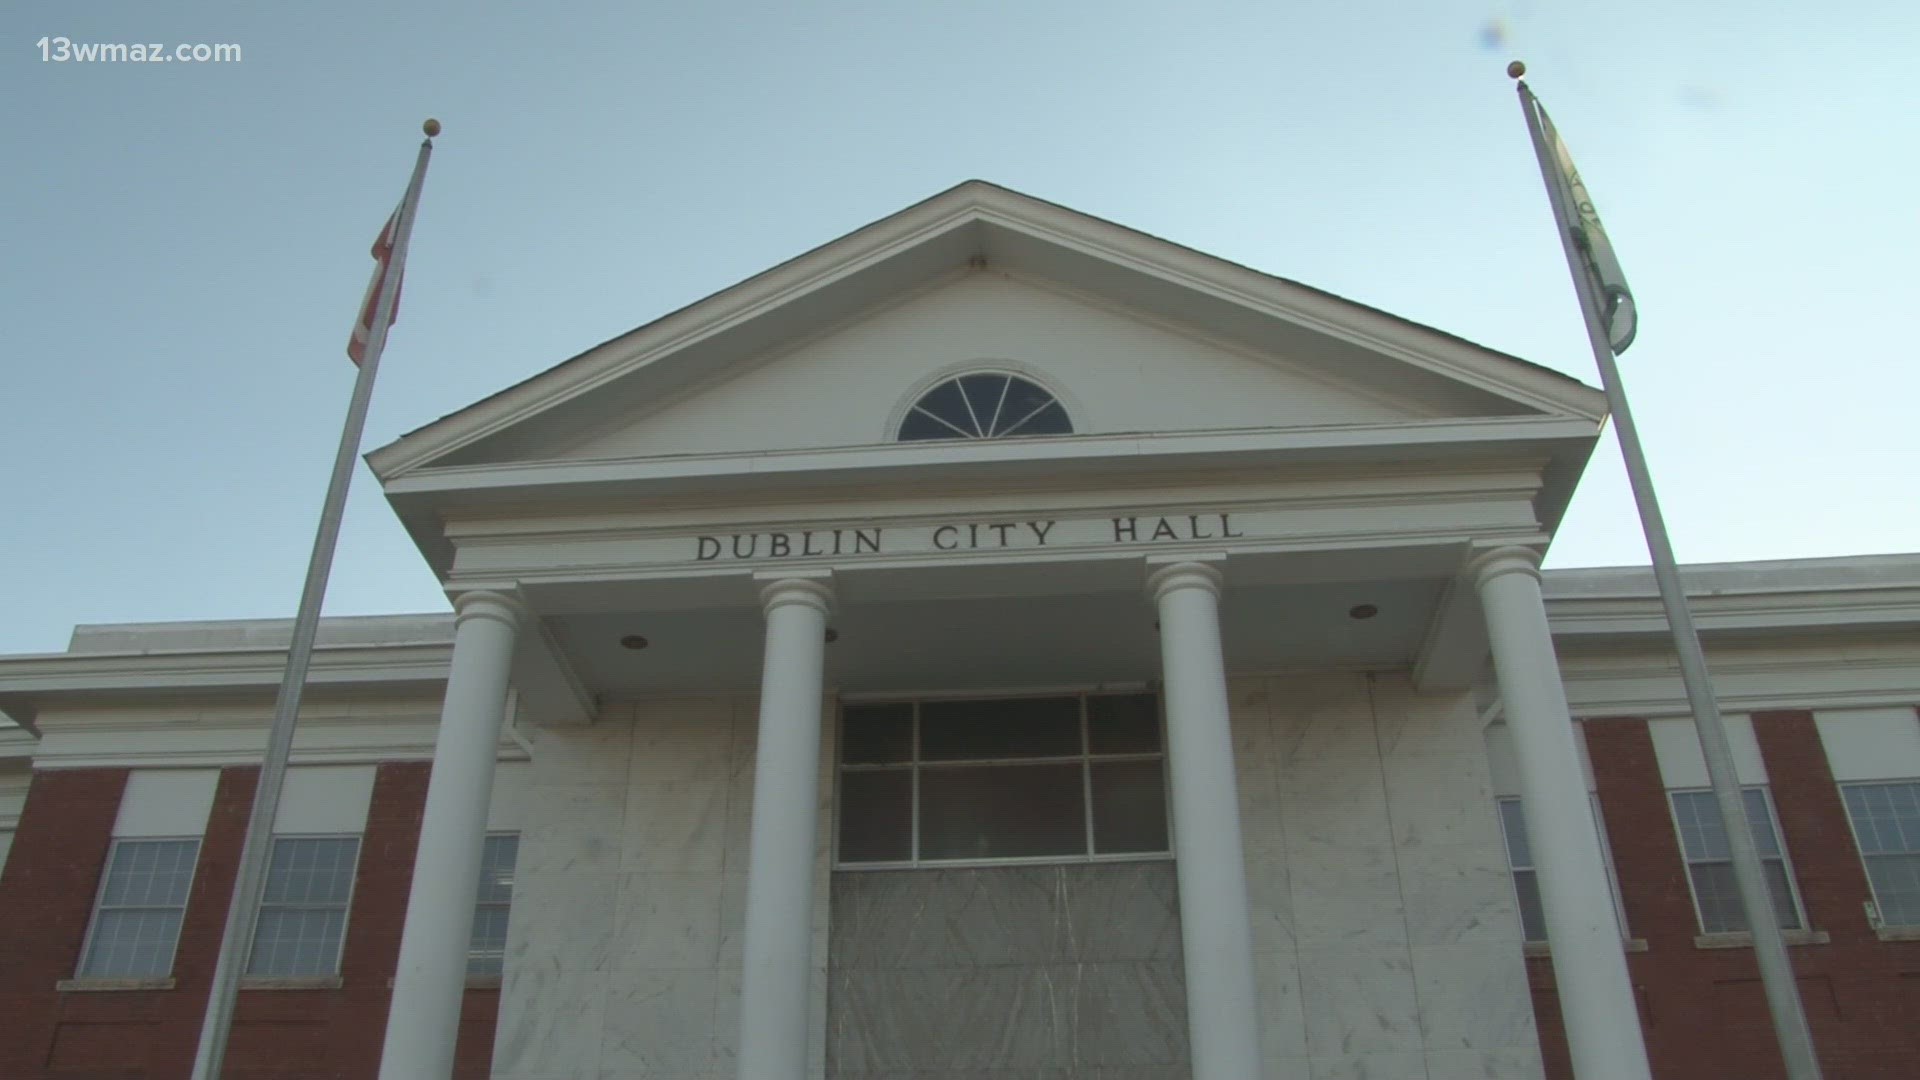 The city hopes this new ordinance will fill some of the gaps from the first ordinance, by taking a more considerate approach to those who need help.